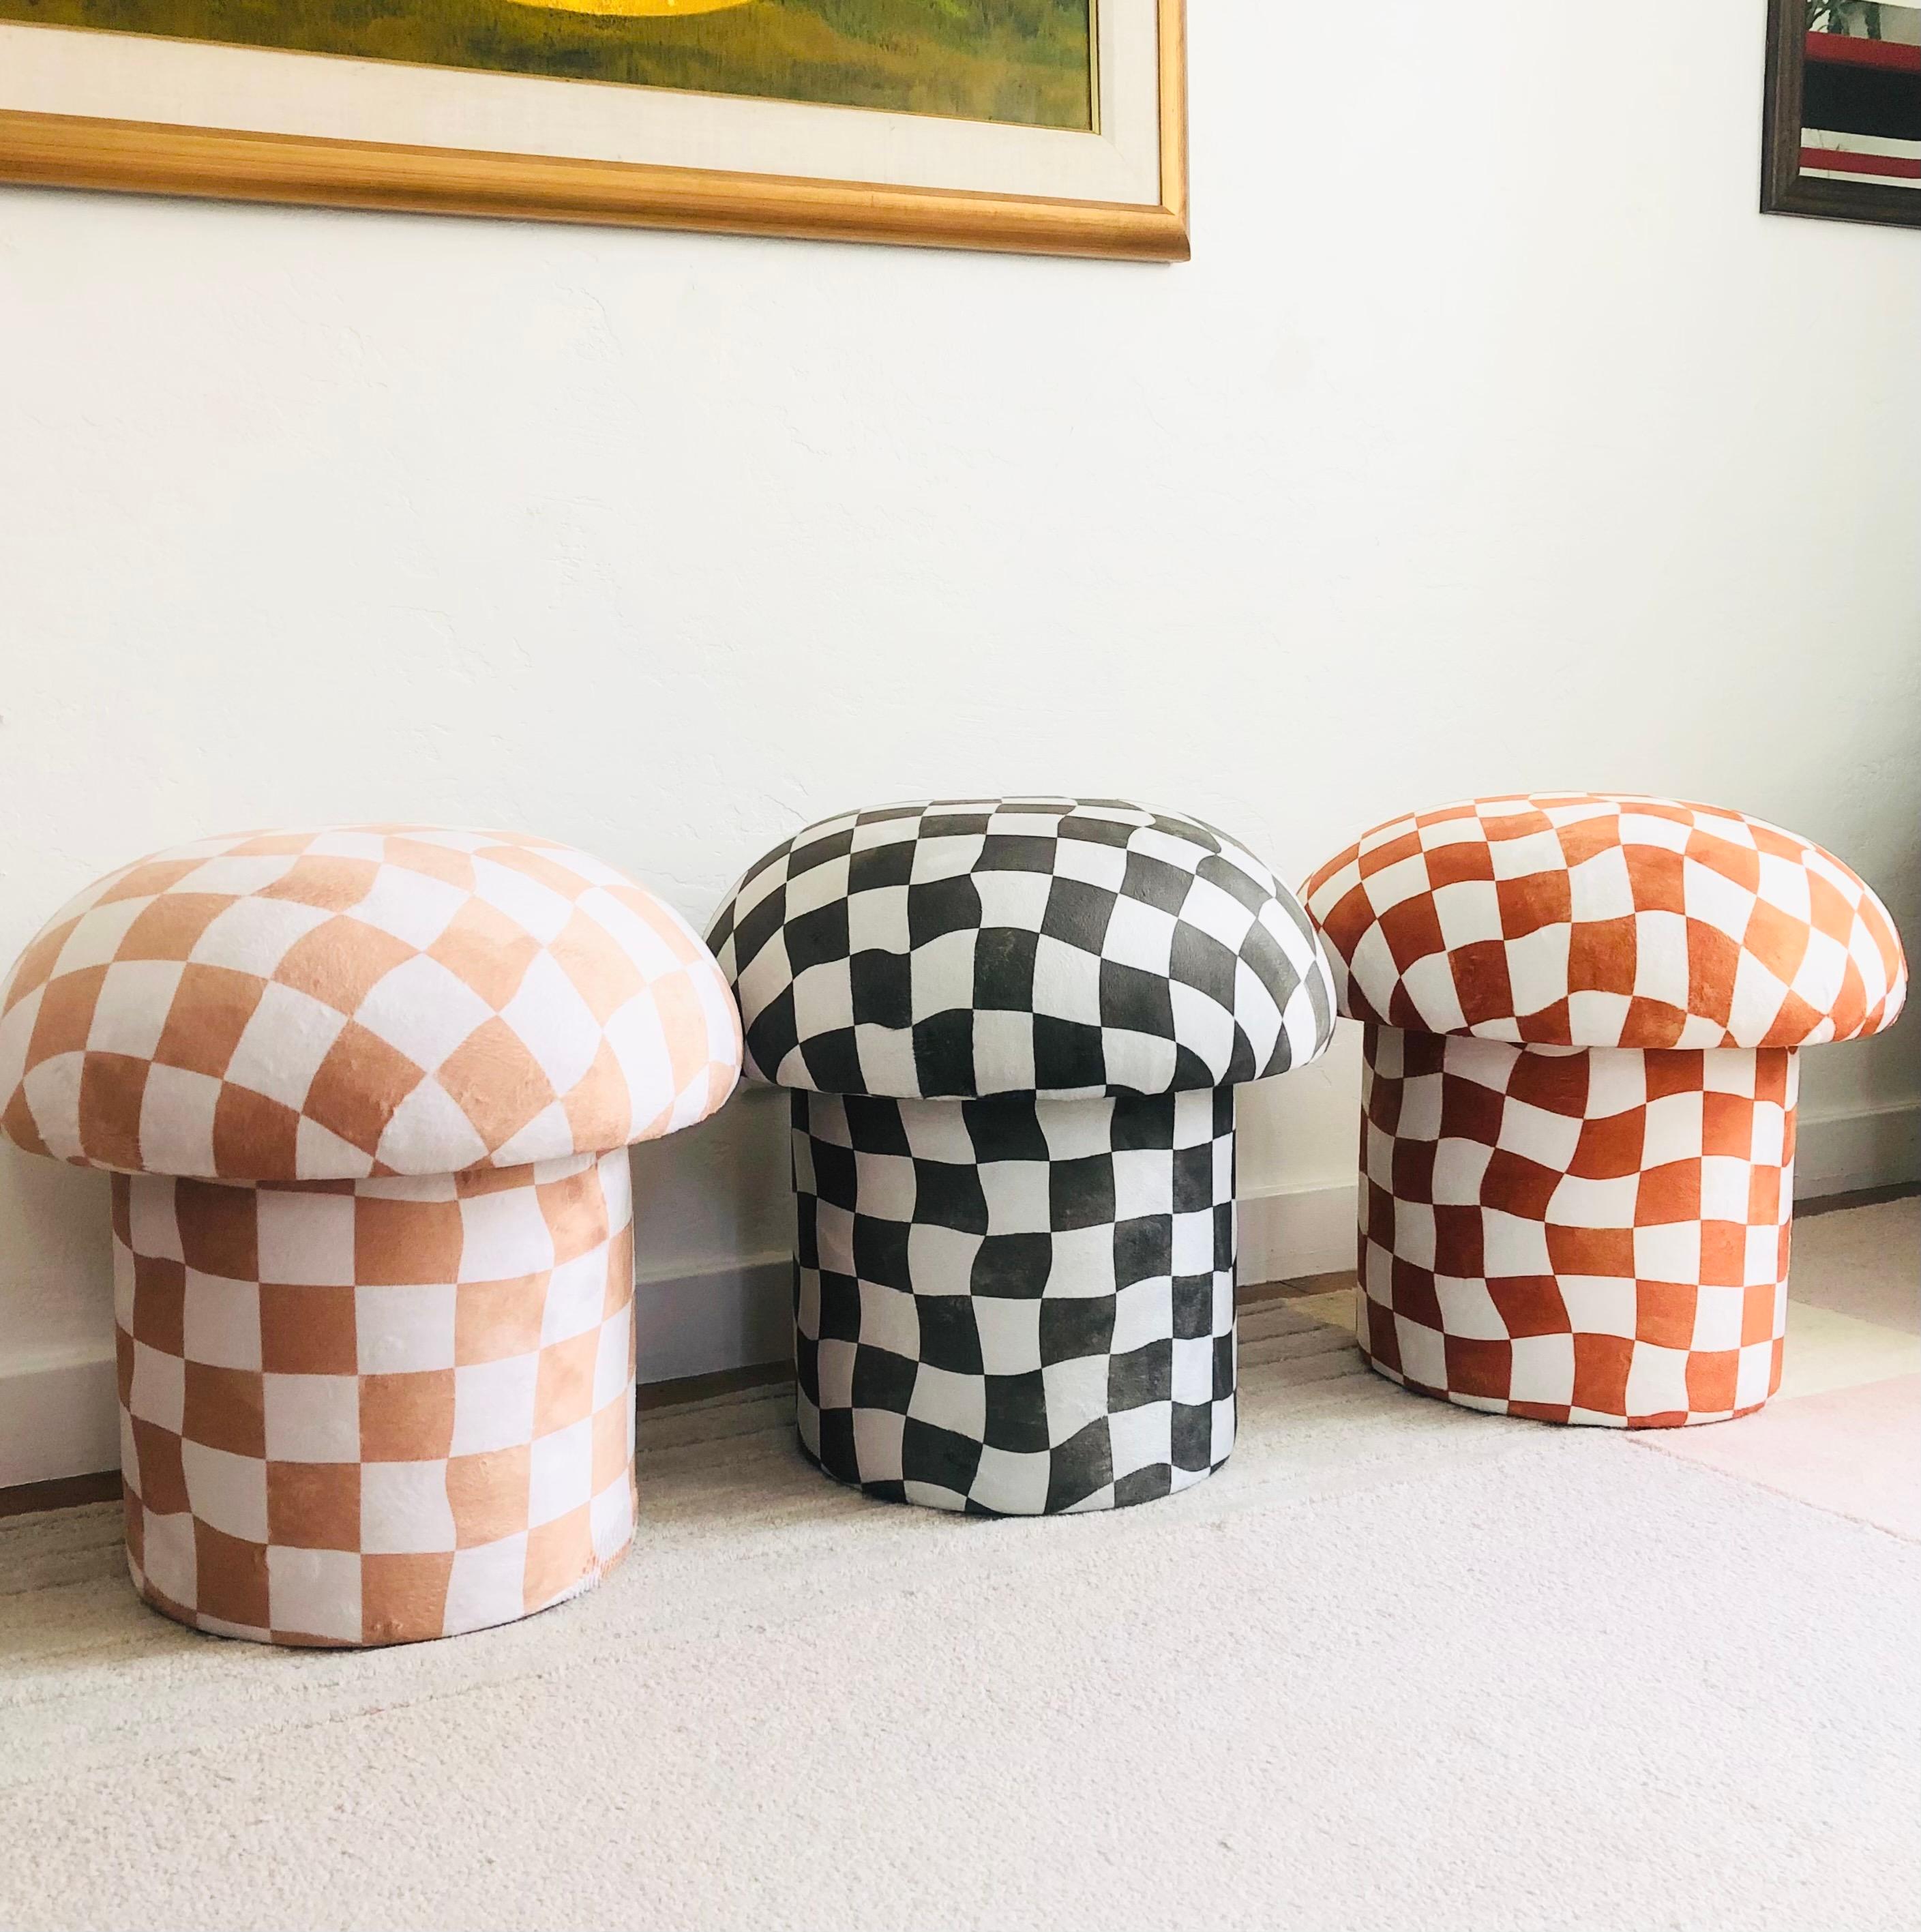 A handmade mushroom shaped ottoman, upholstered in a muted olive and a greenish off-white warped checkerboard velvet fabric. Perfect for using as a footstool or extra occasional seating. A comfortable cushioned seat and sculptural accent